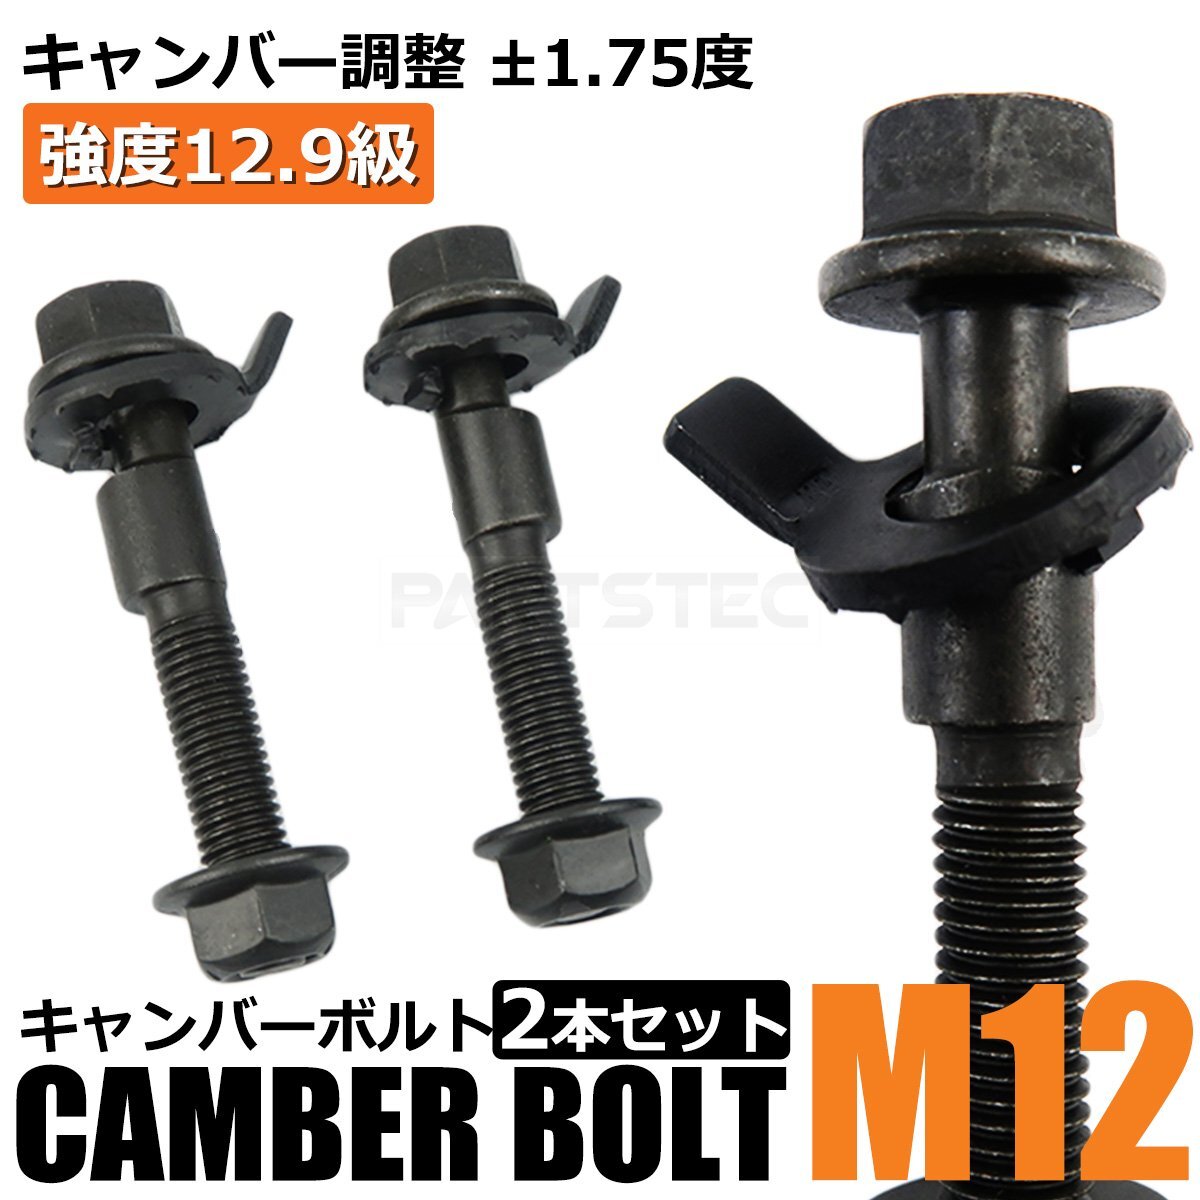  Camber bolt 12mm 2 pcs set Wagon R MH21S MH22S MH23S MH34S front Camber adjustment ±1.75 times M12 strength 12.9 / 148-69x2